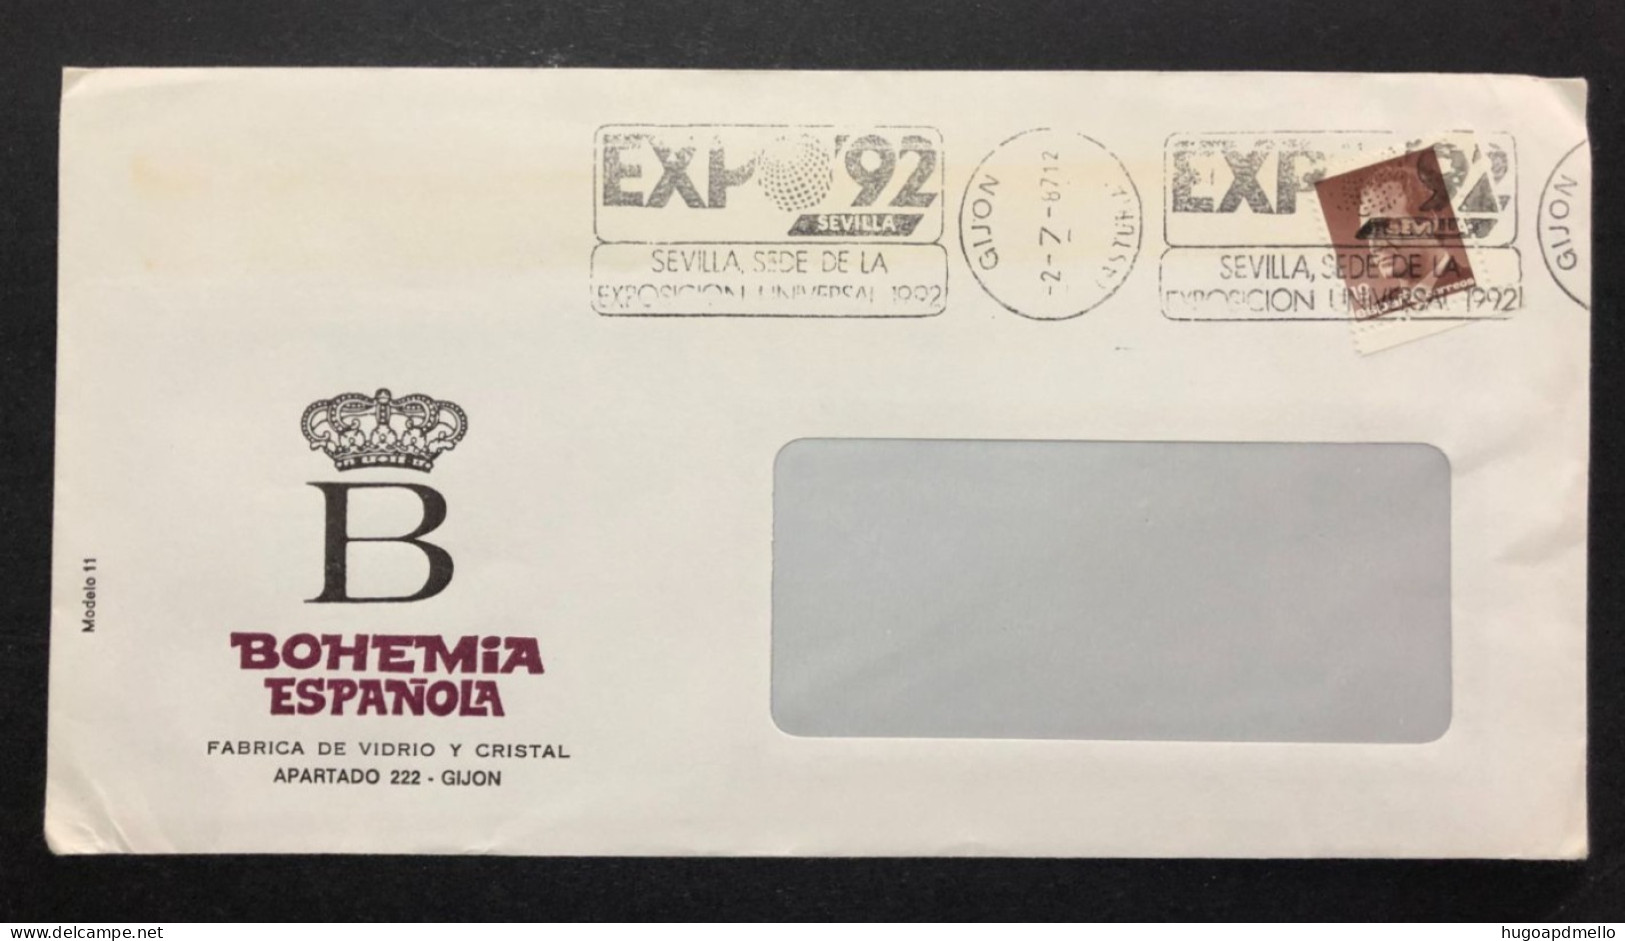 SPAIN, Cover With Special Cancellation « EXPO '92 », « GIJON Postmark », 1987 - 1992 – Séville (Espagne)